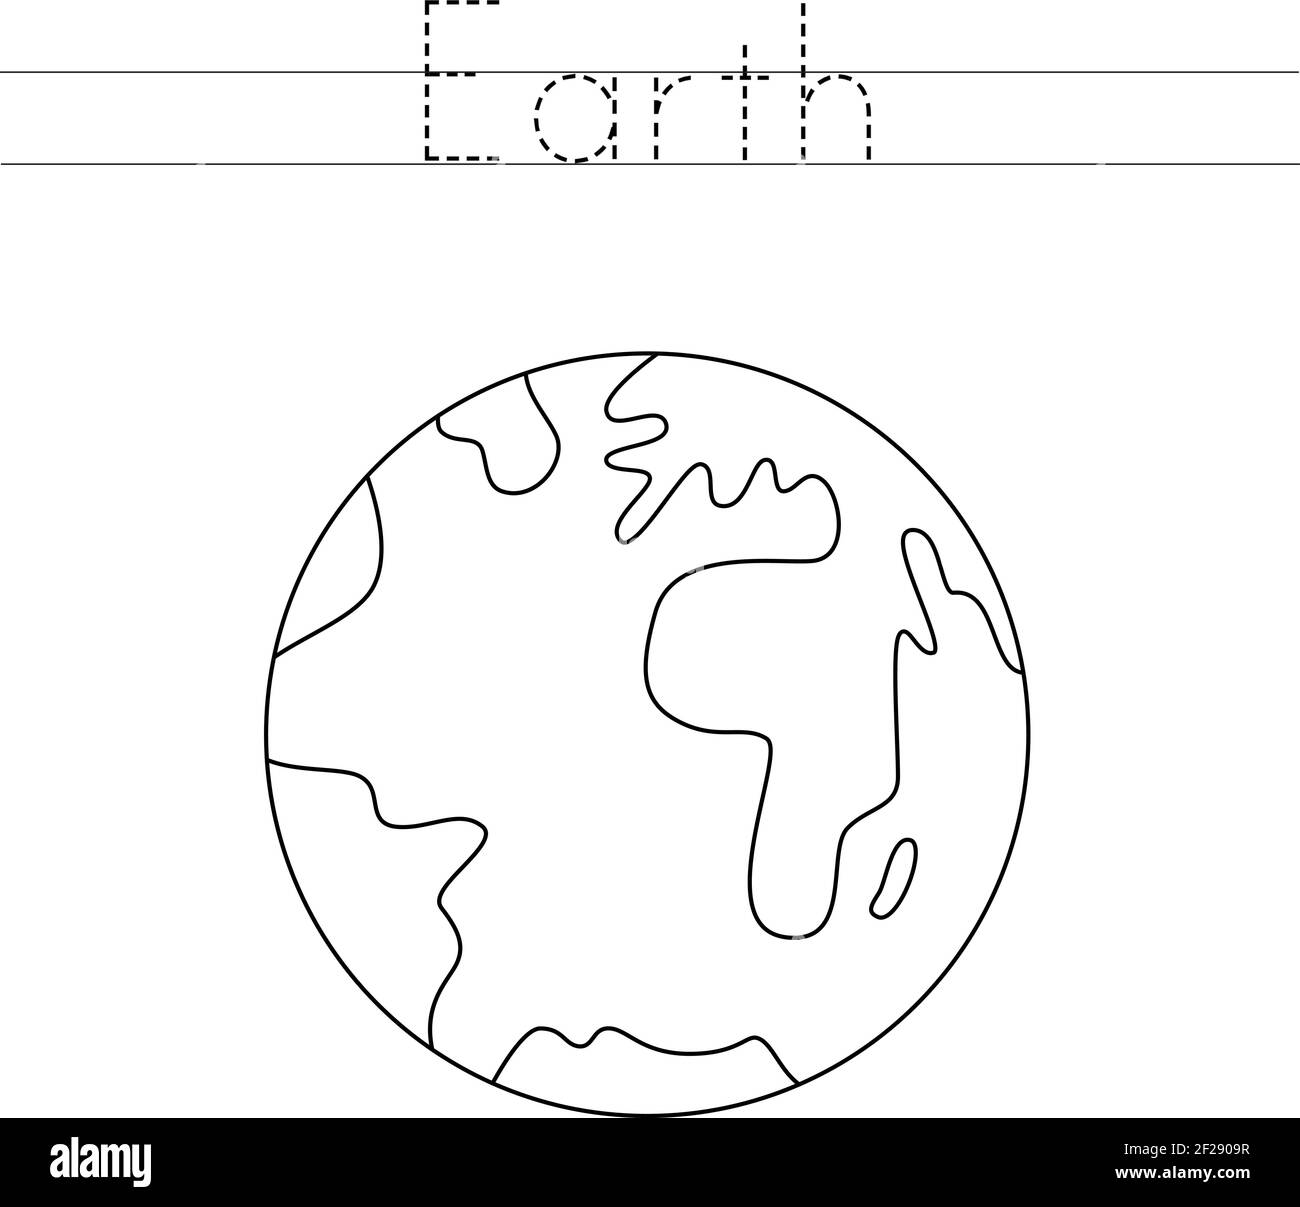 Trace the word. Color planet Earth. Handwriting practice for preschool ...